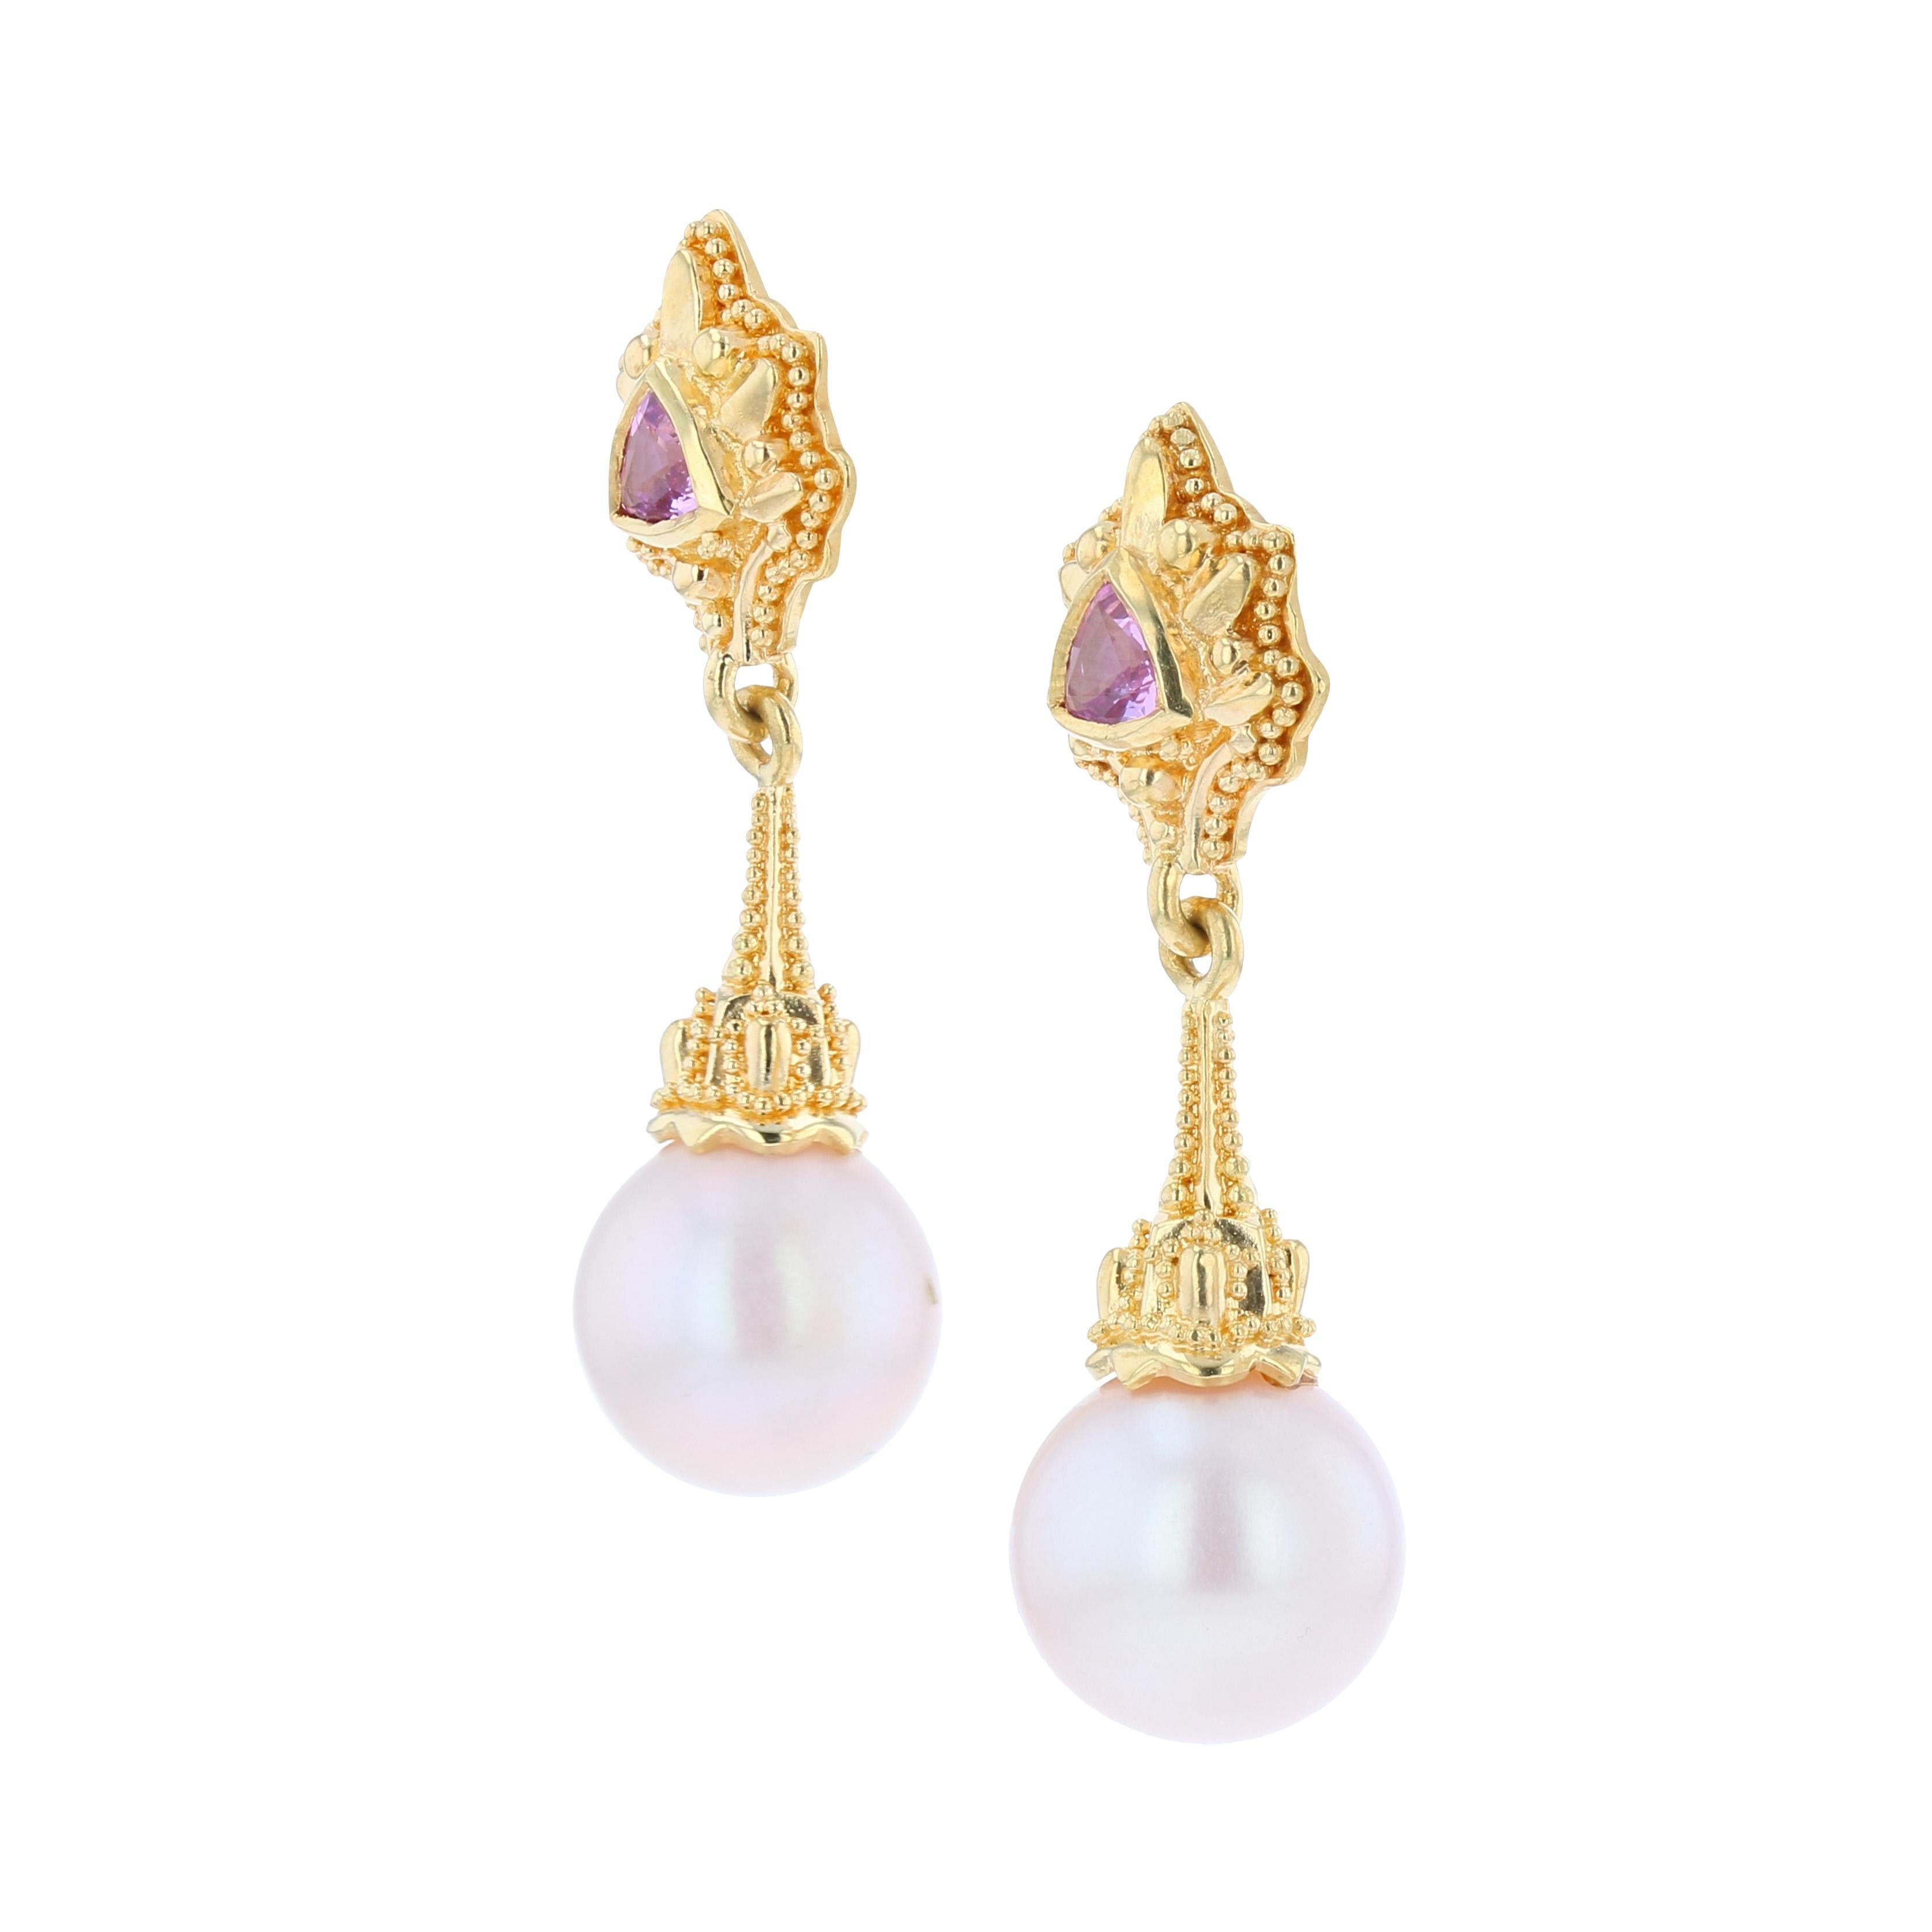 Trillion Cut Kent Raible 18 Karat Gold Pink Sapphire and Pearl Drop Earrings with Granulation